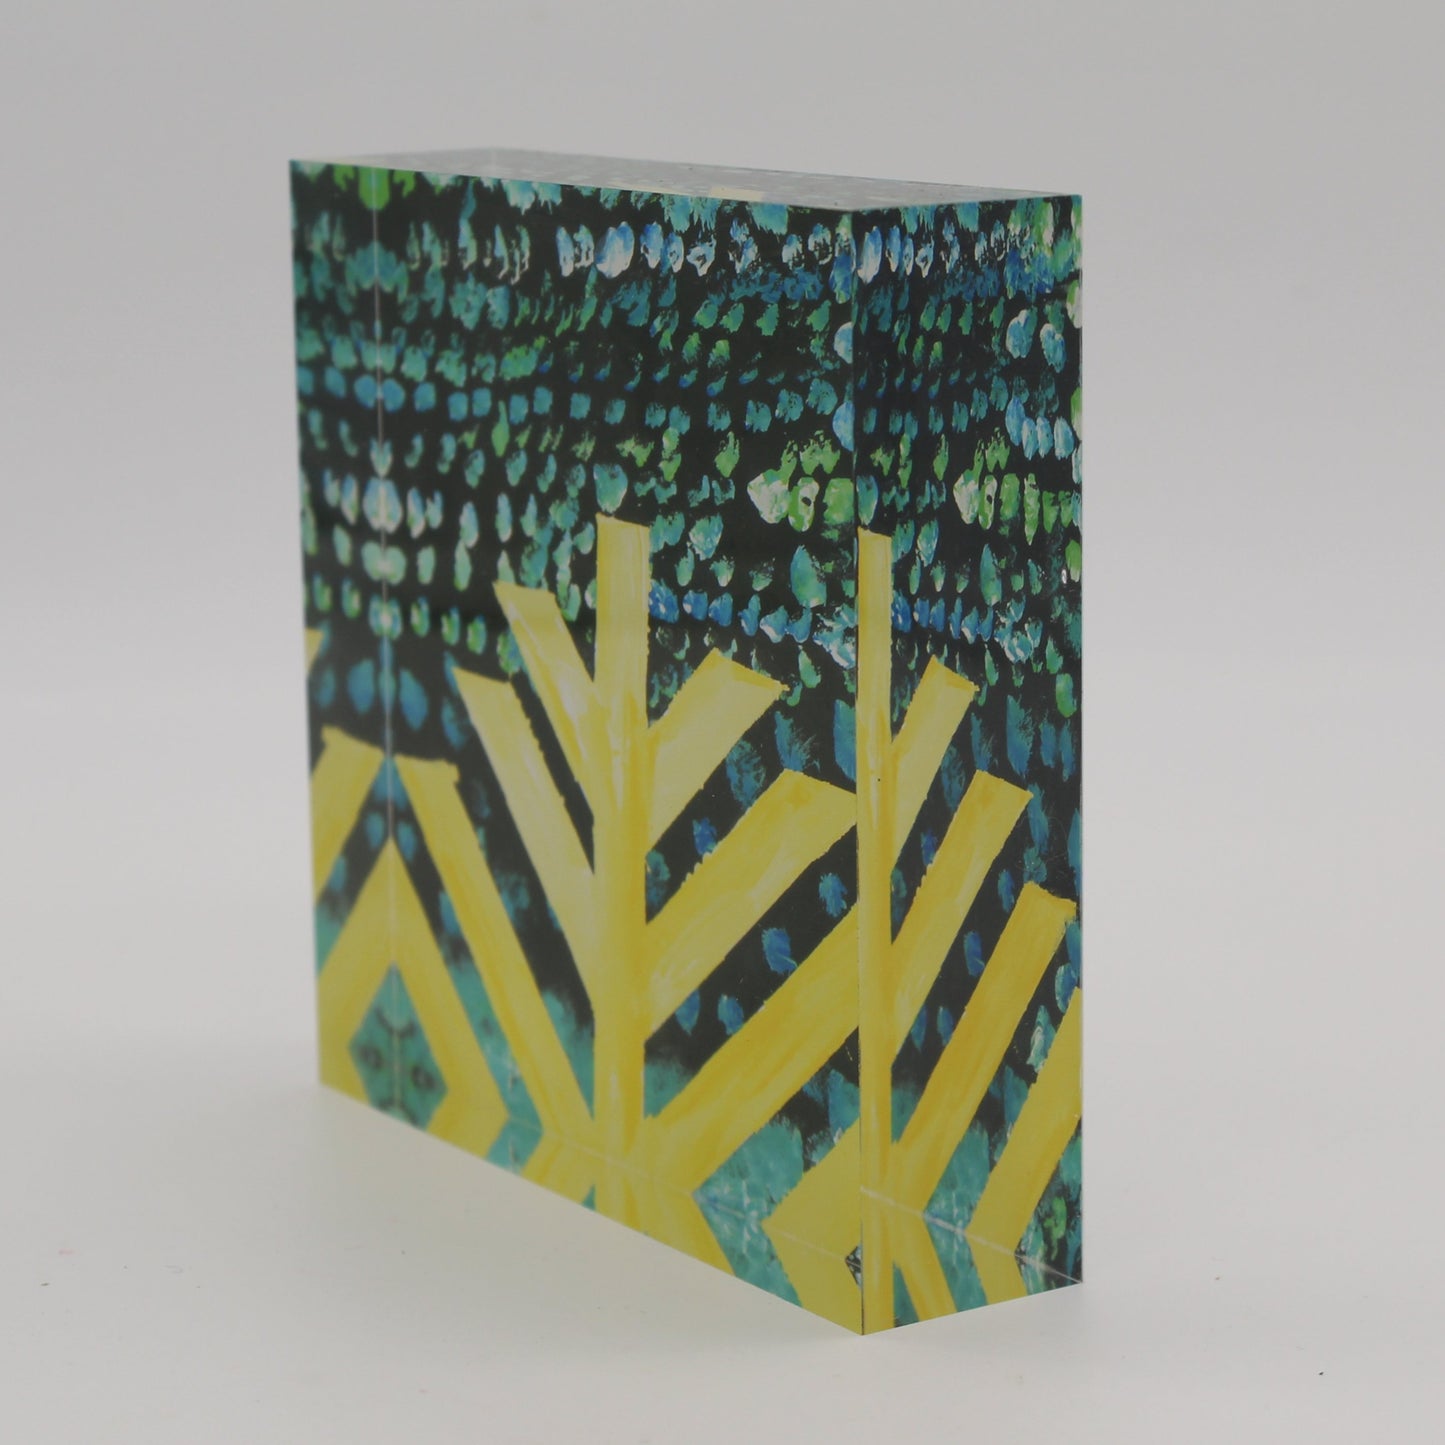 Tilted view of Acrylic block with black background, yellow menorah, and blue, turquoise and green dots